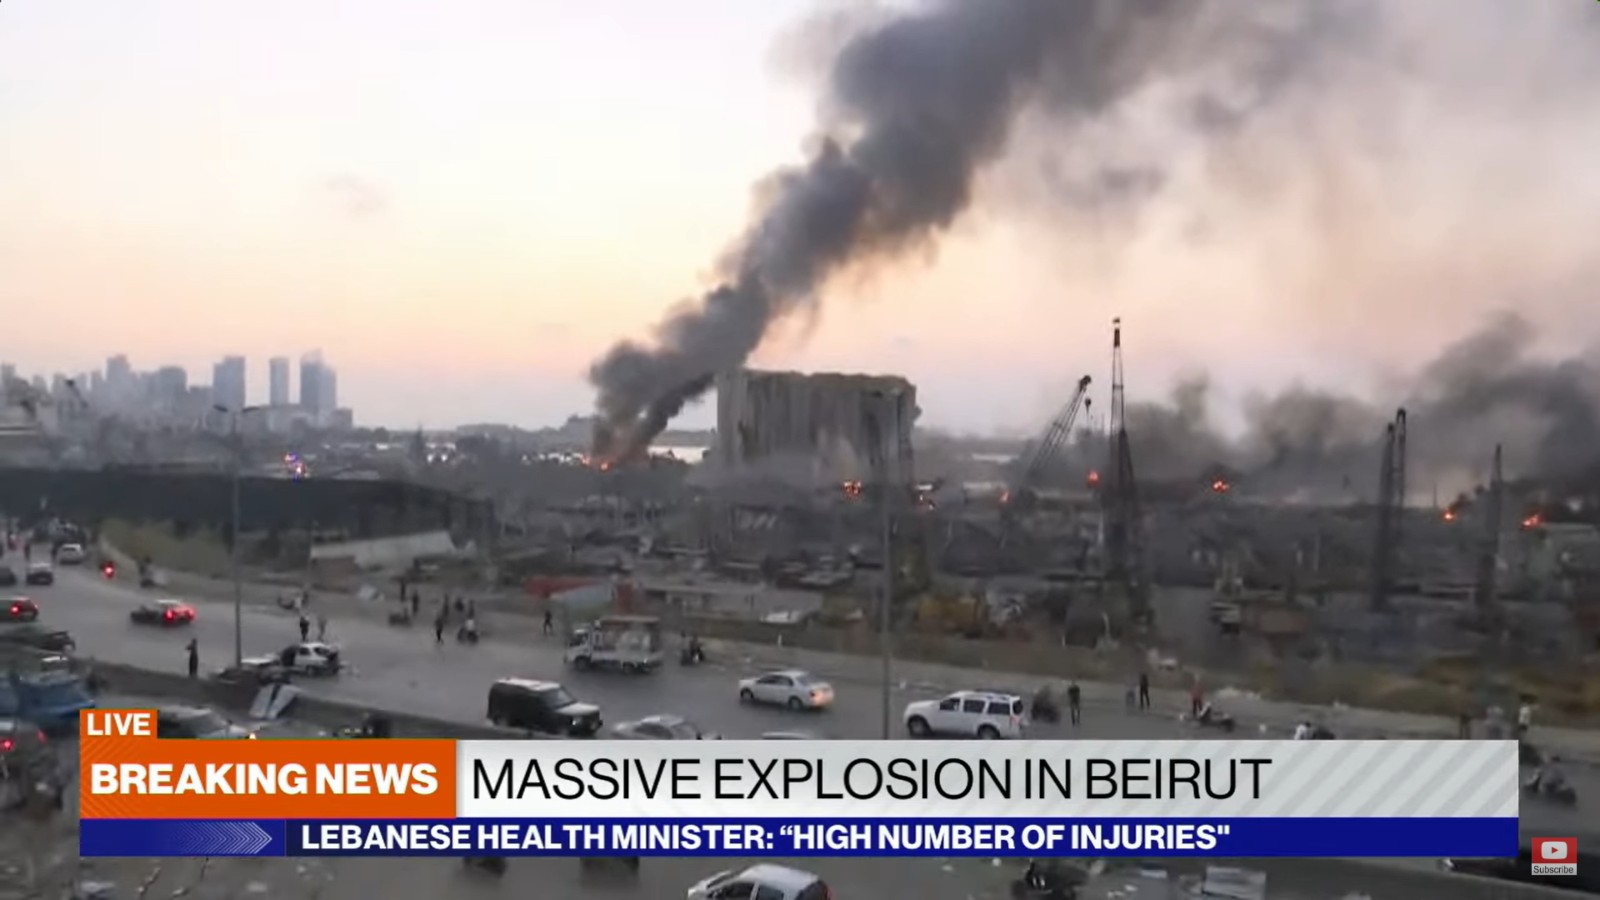 Screenshot from ABC News video of the Beirut warehouse explosion on Aug. 4, 2020.